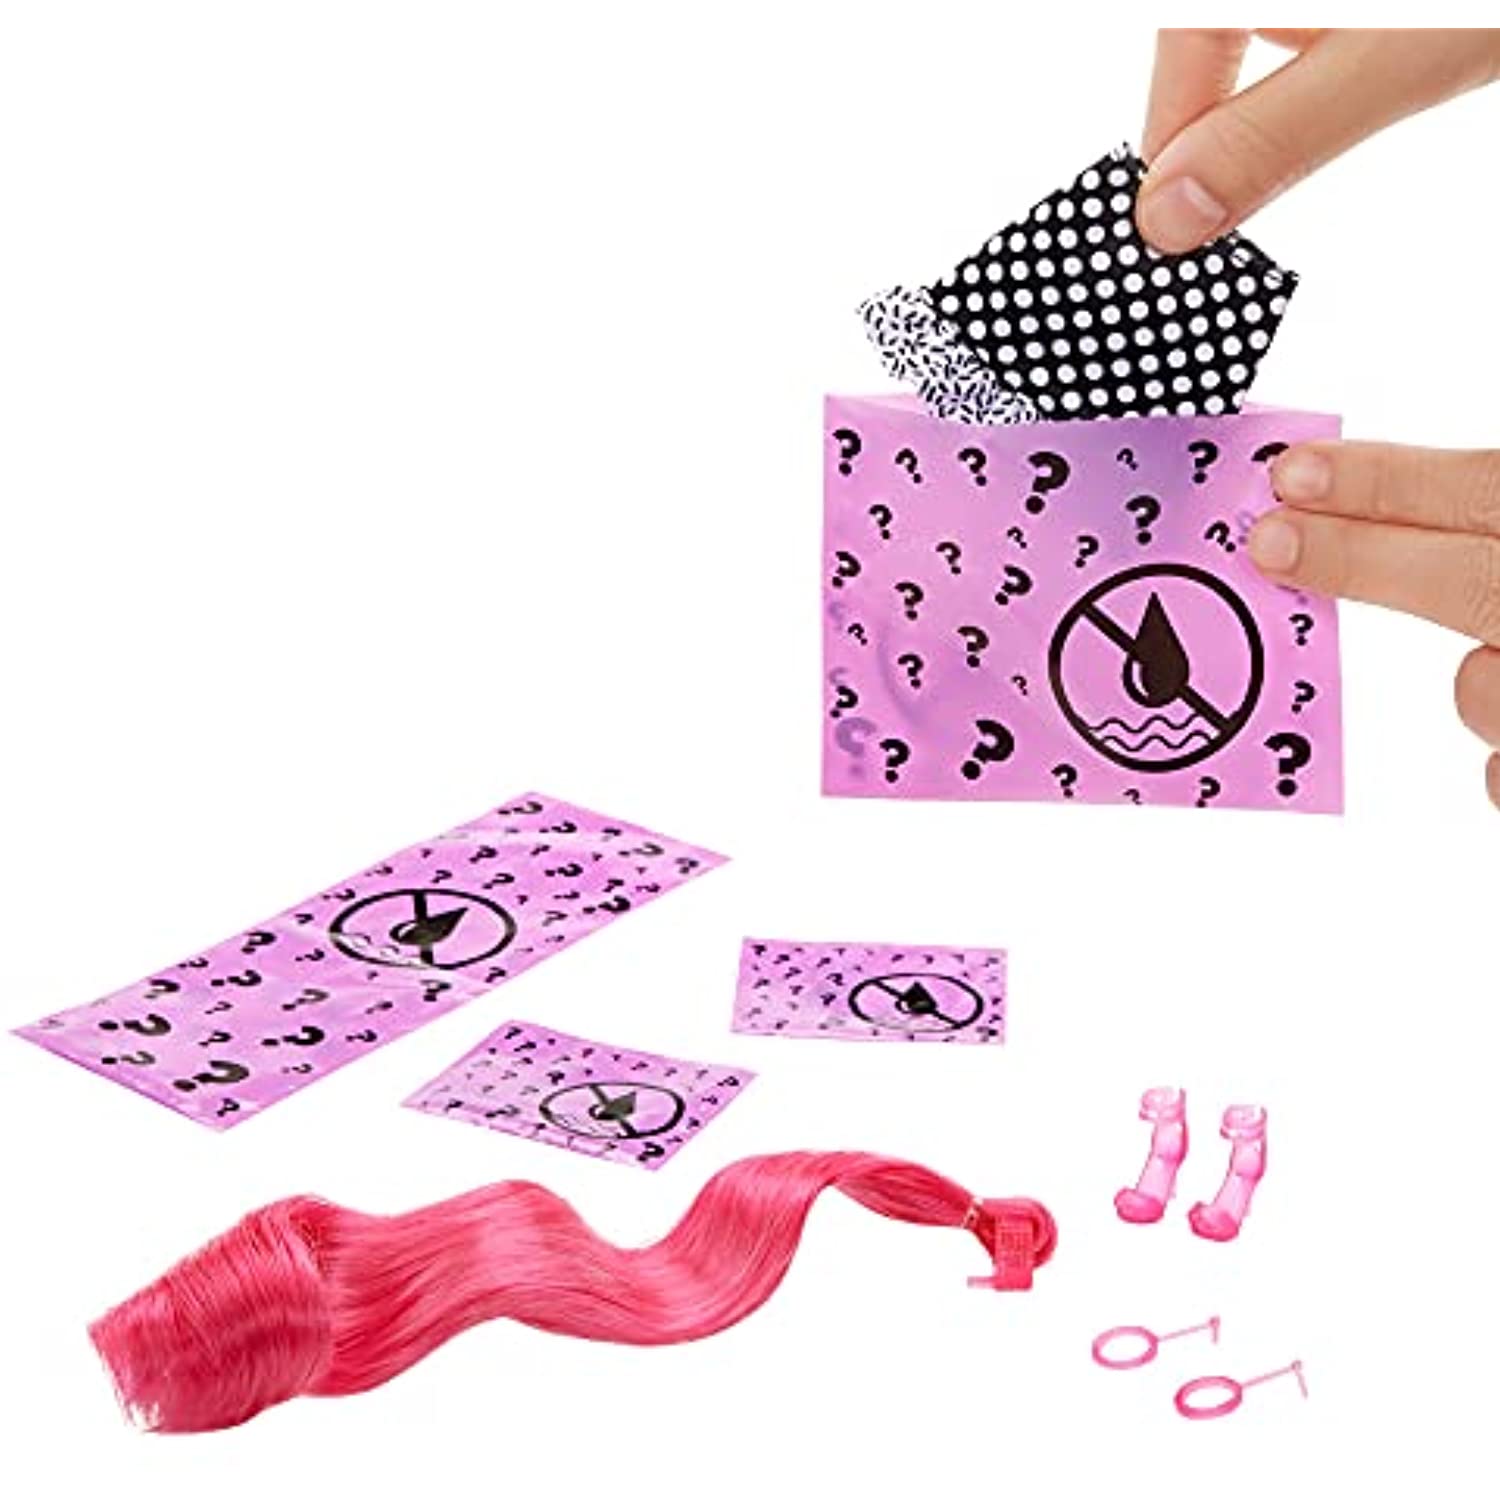 Barbie Color Reveal Doll with 7 Surprises: 4 Mystery Bags Contain Surprise Hair Piece, Skirt, Shoes & Earrings; Water Reveals Doll’s Look & Color Change on Bodice & Hair [Styles May Vary]